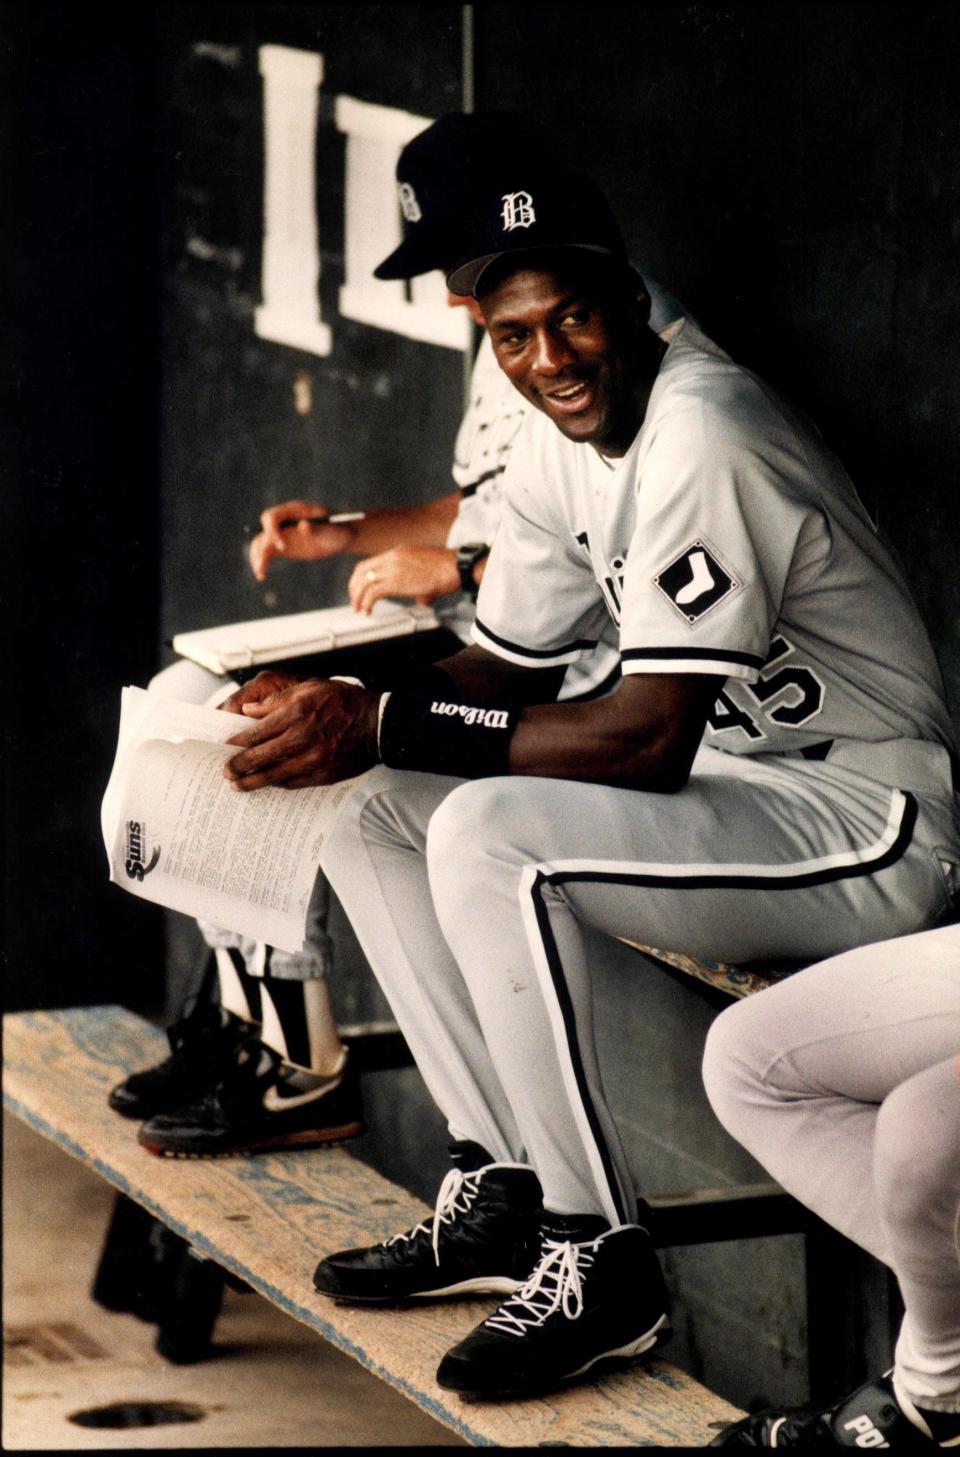 Michael Jordan relaxes in the Birmingham Barons dugout during his minor-league baseball appearnce at Wolfson Park in Jacksonville. He didn't play that day, disappointing fans who flocked to the stadium to see him.